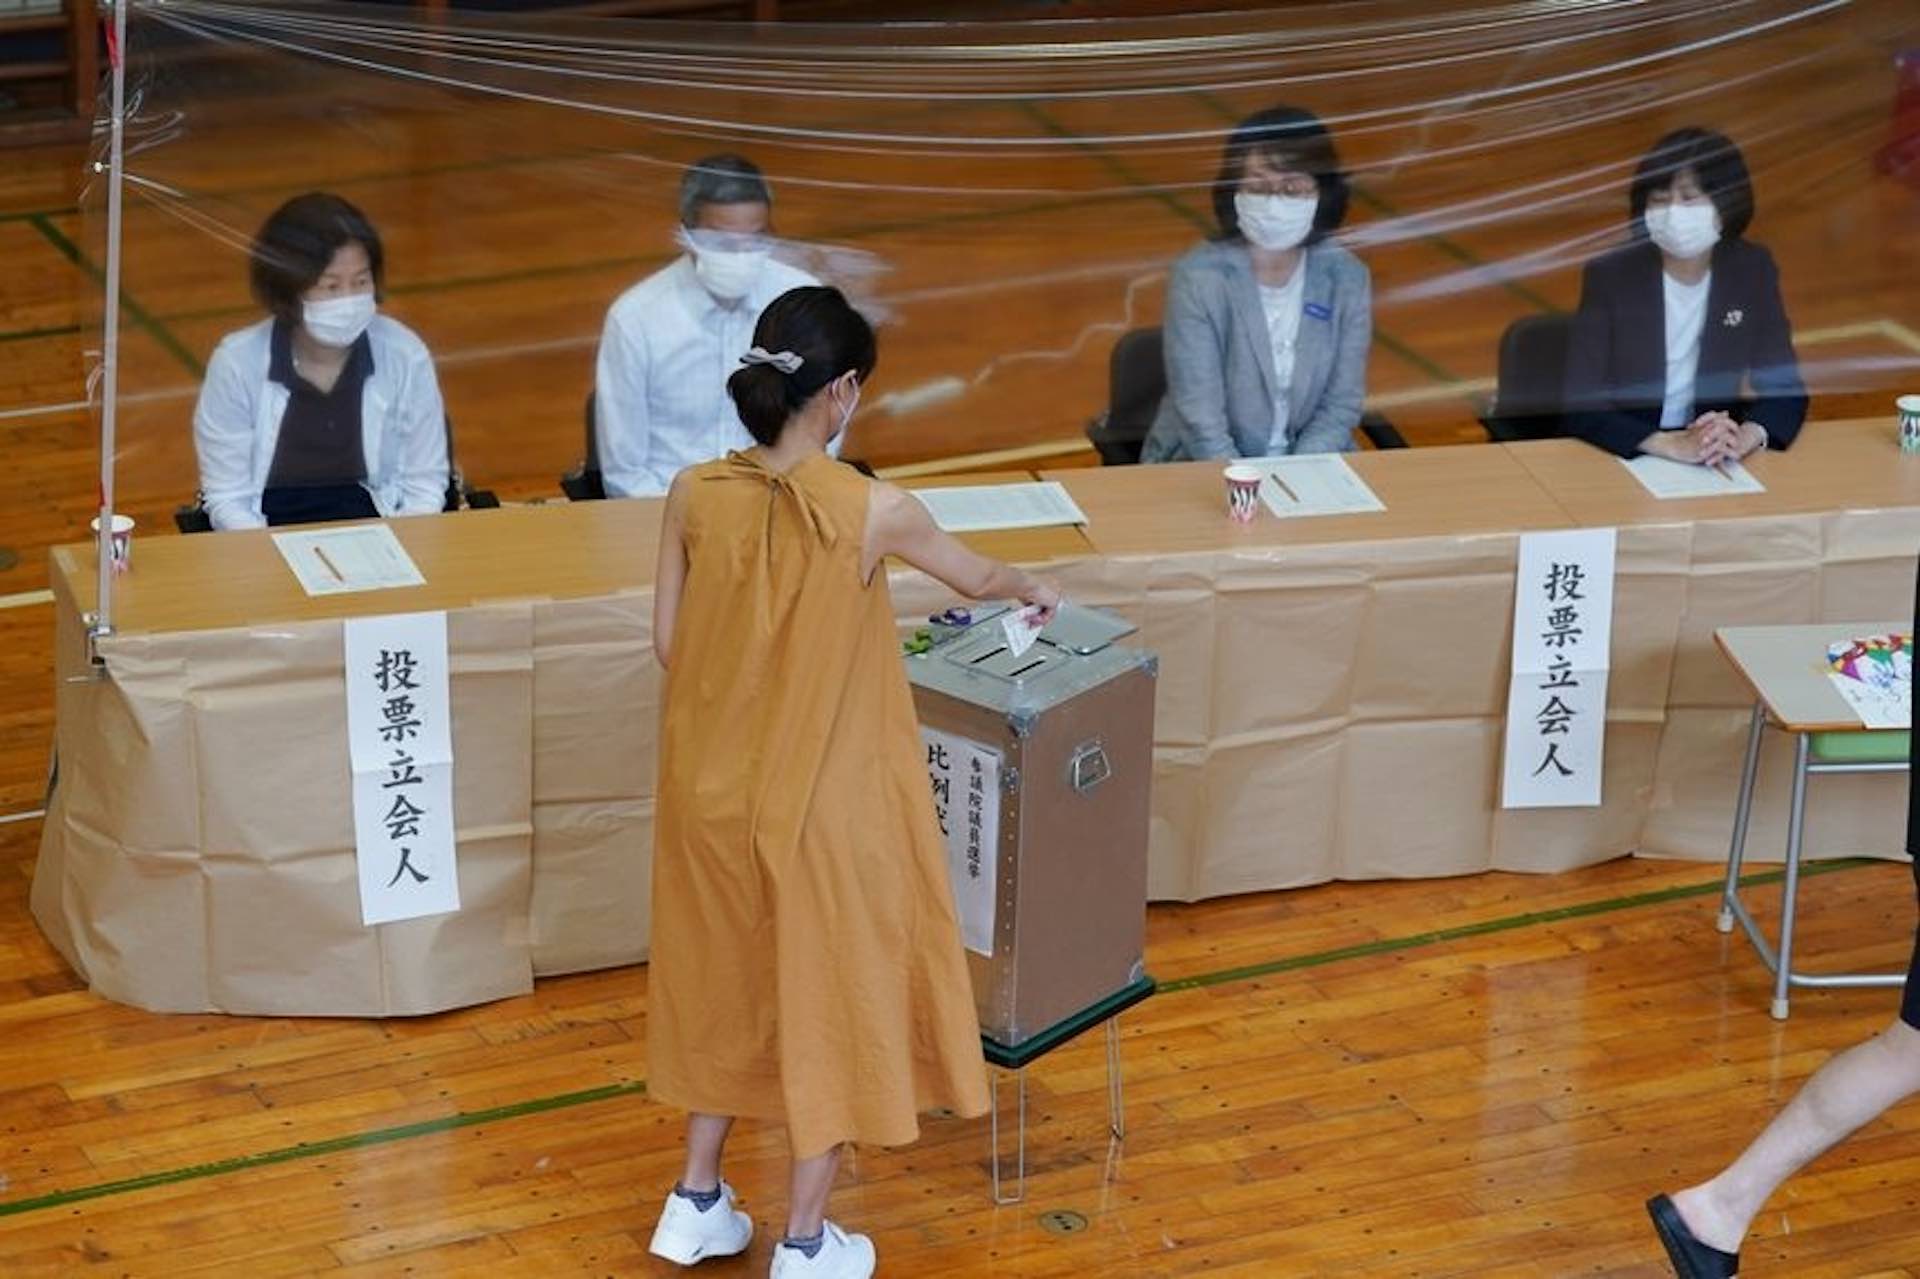 Exit polls predict ruling party will win parliamentary elections in Japan